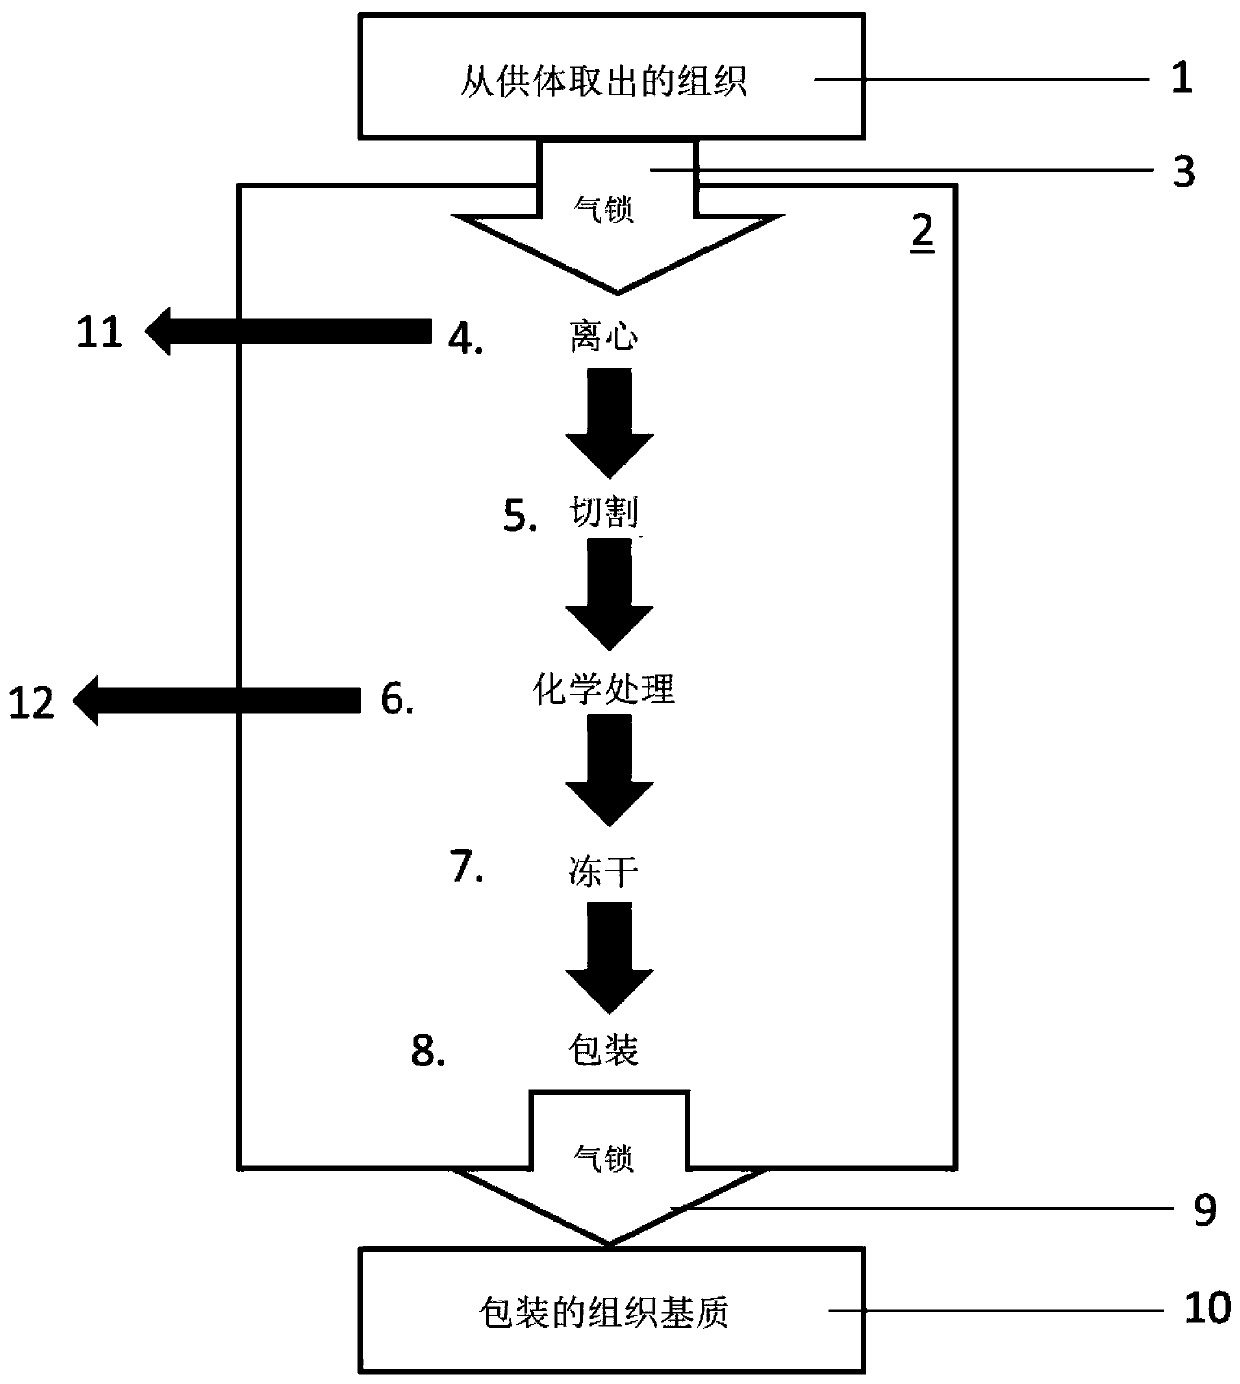 Automated method for producing human or animal tissue for transplants